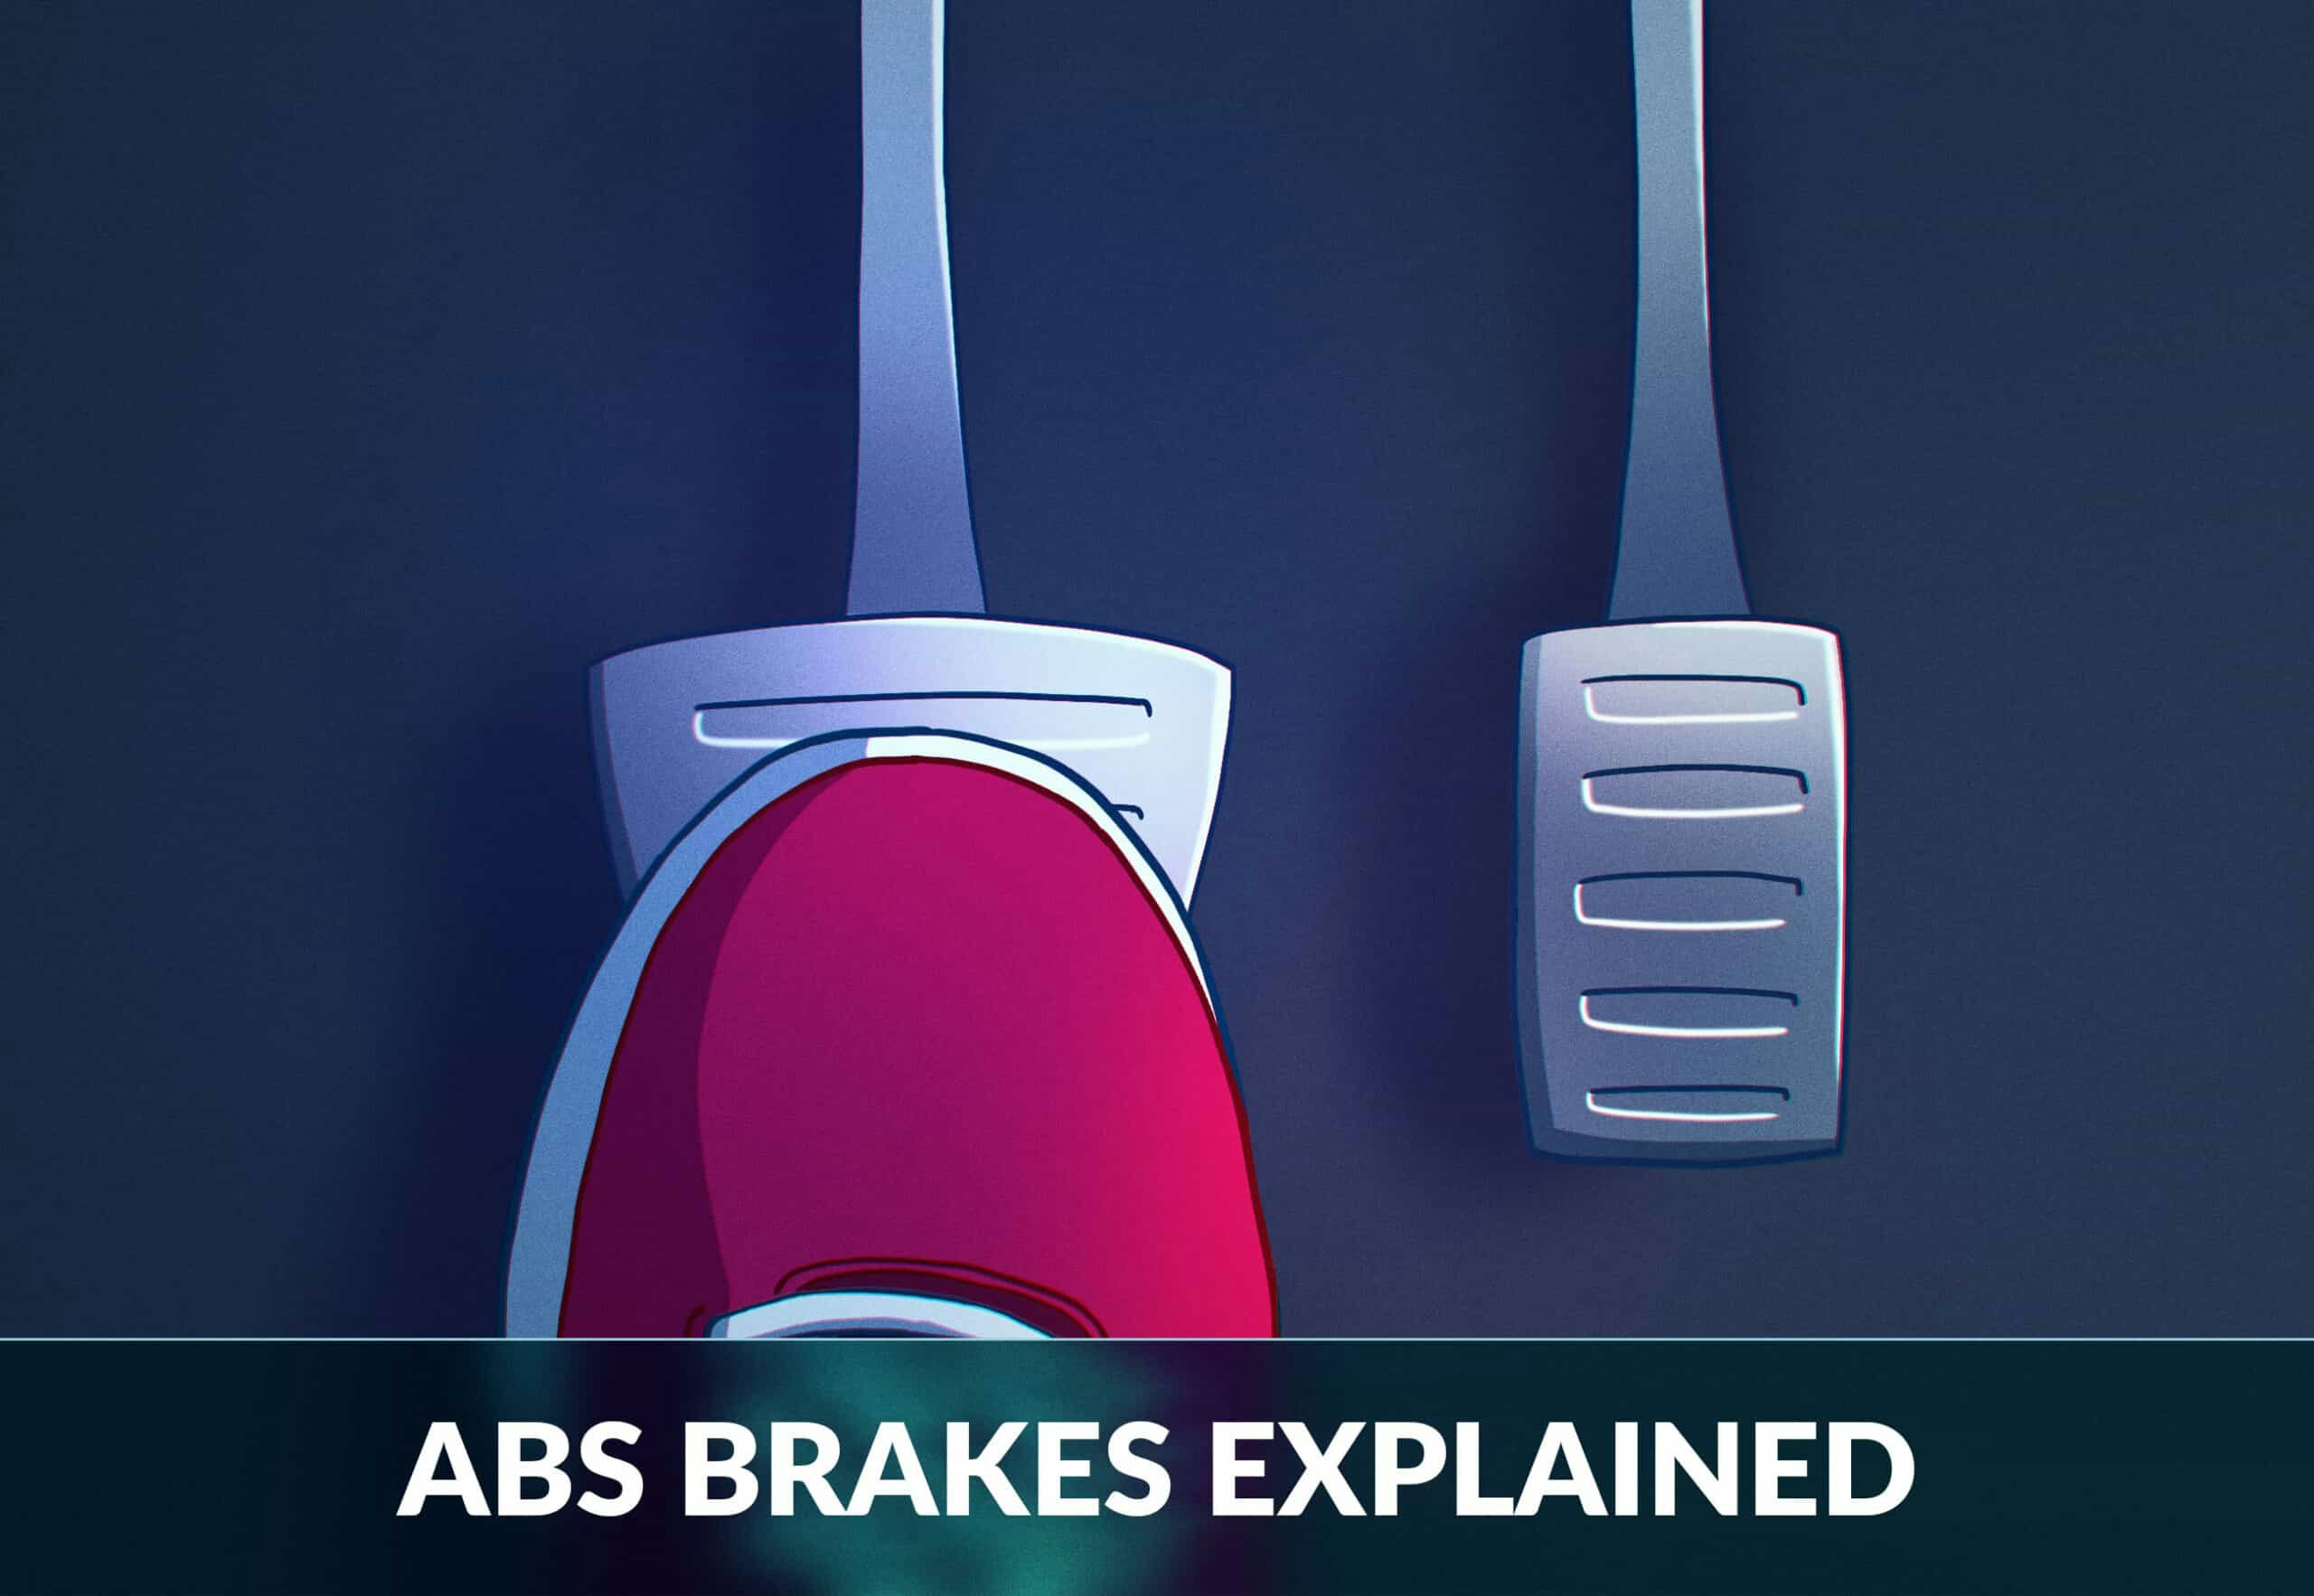 ABS Brakes explained